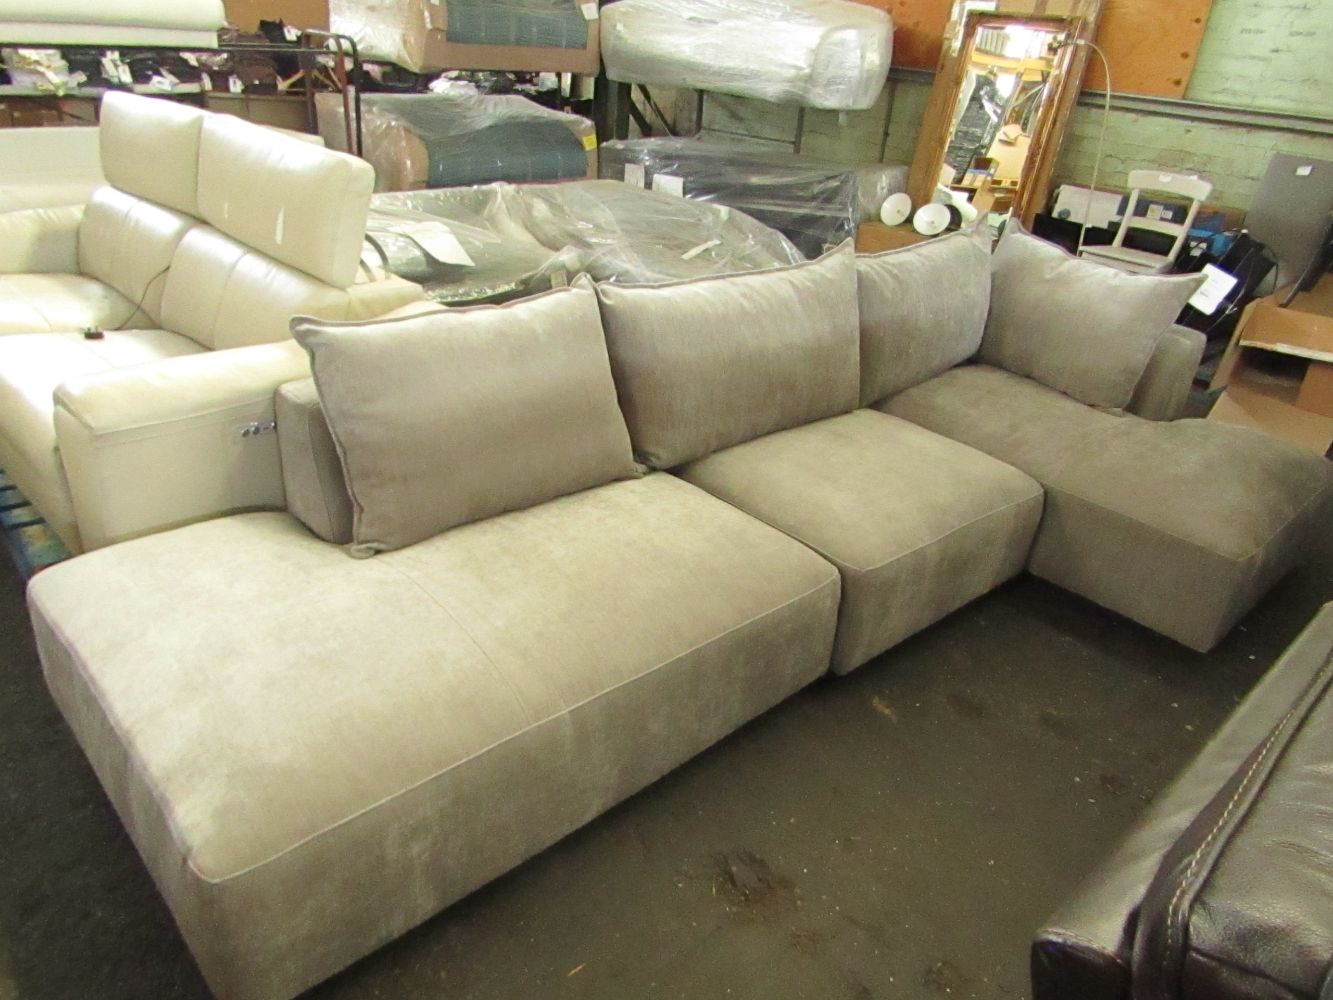 Sofas and Armchairs from Swoon, Costco and more